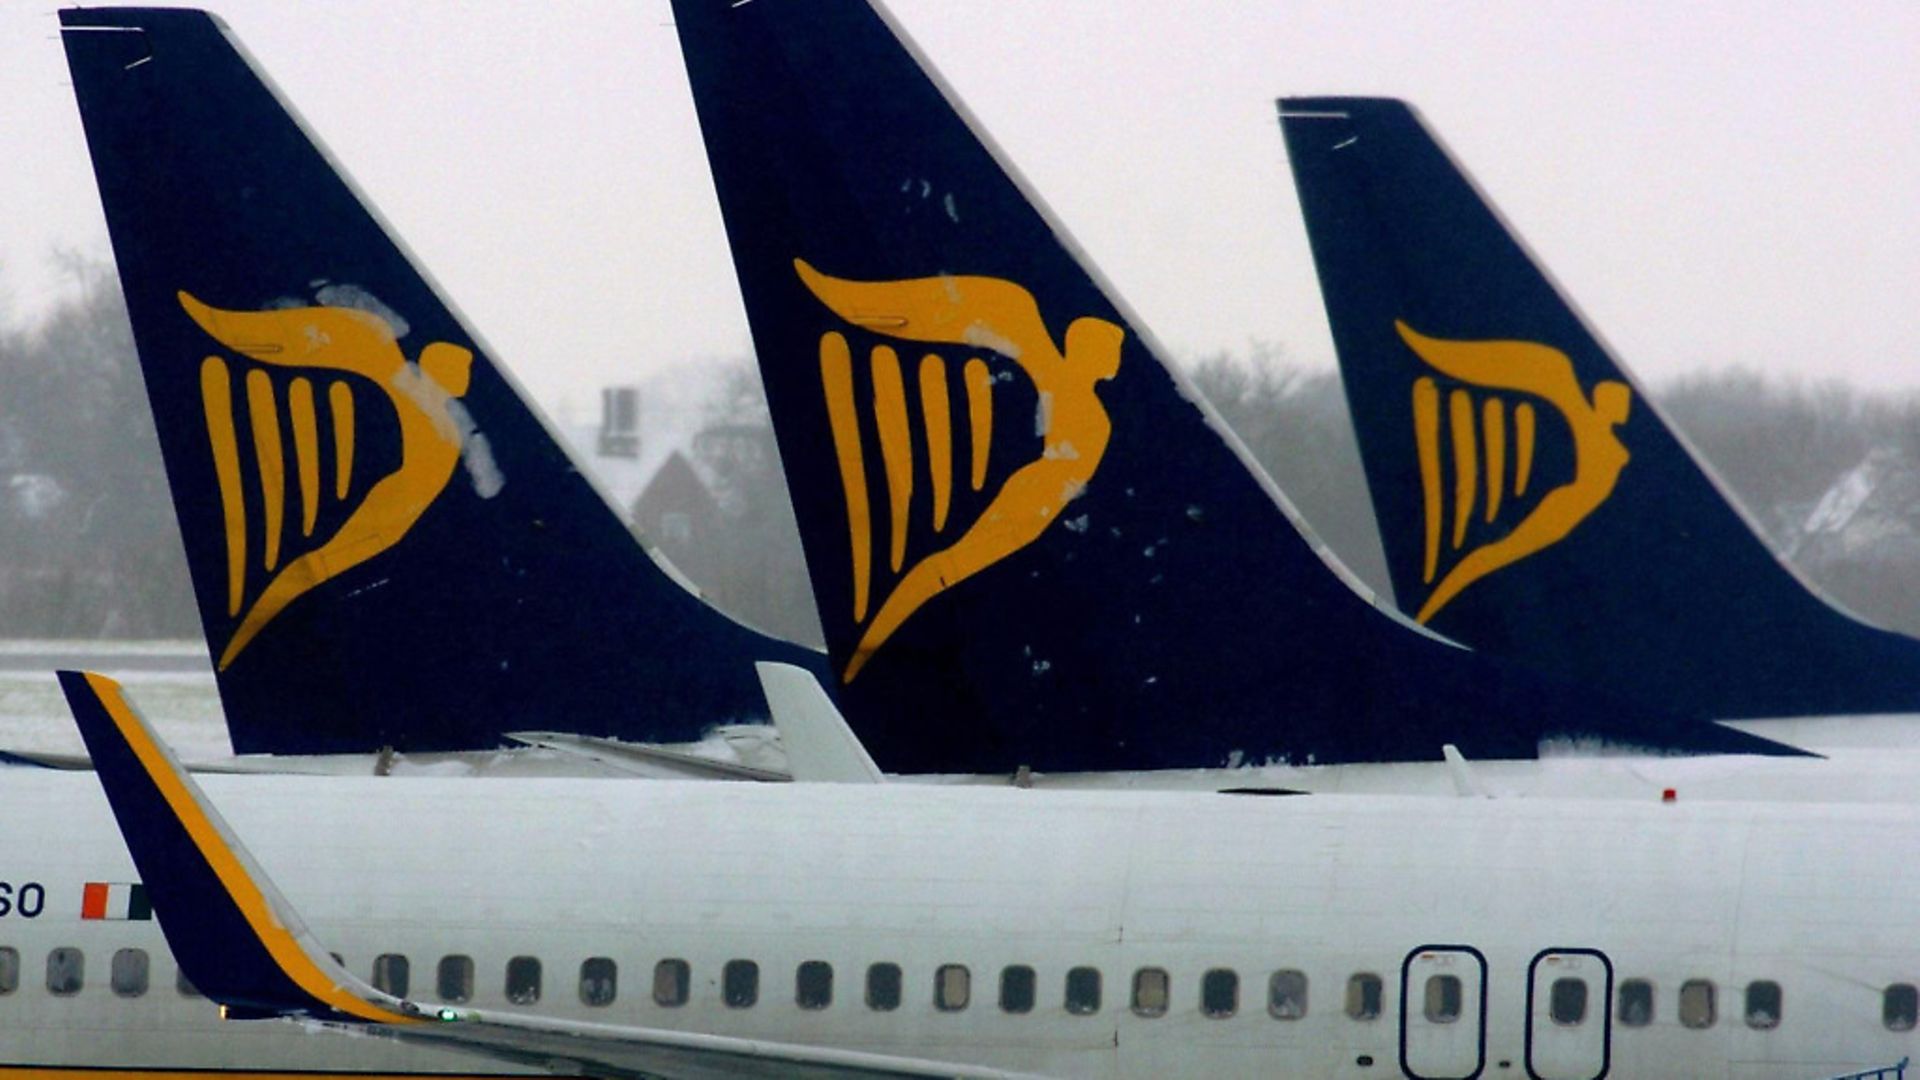 Ryanair planes wait on the snow-covered tarmac at Stansted Airport in Essex (question eight) Pic: PA Archive/ PA Images - Credit: PA Archive/PA Images